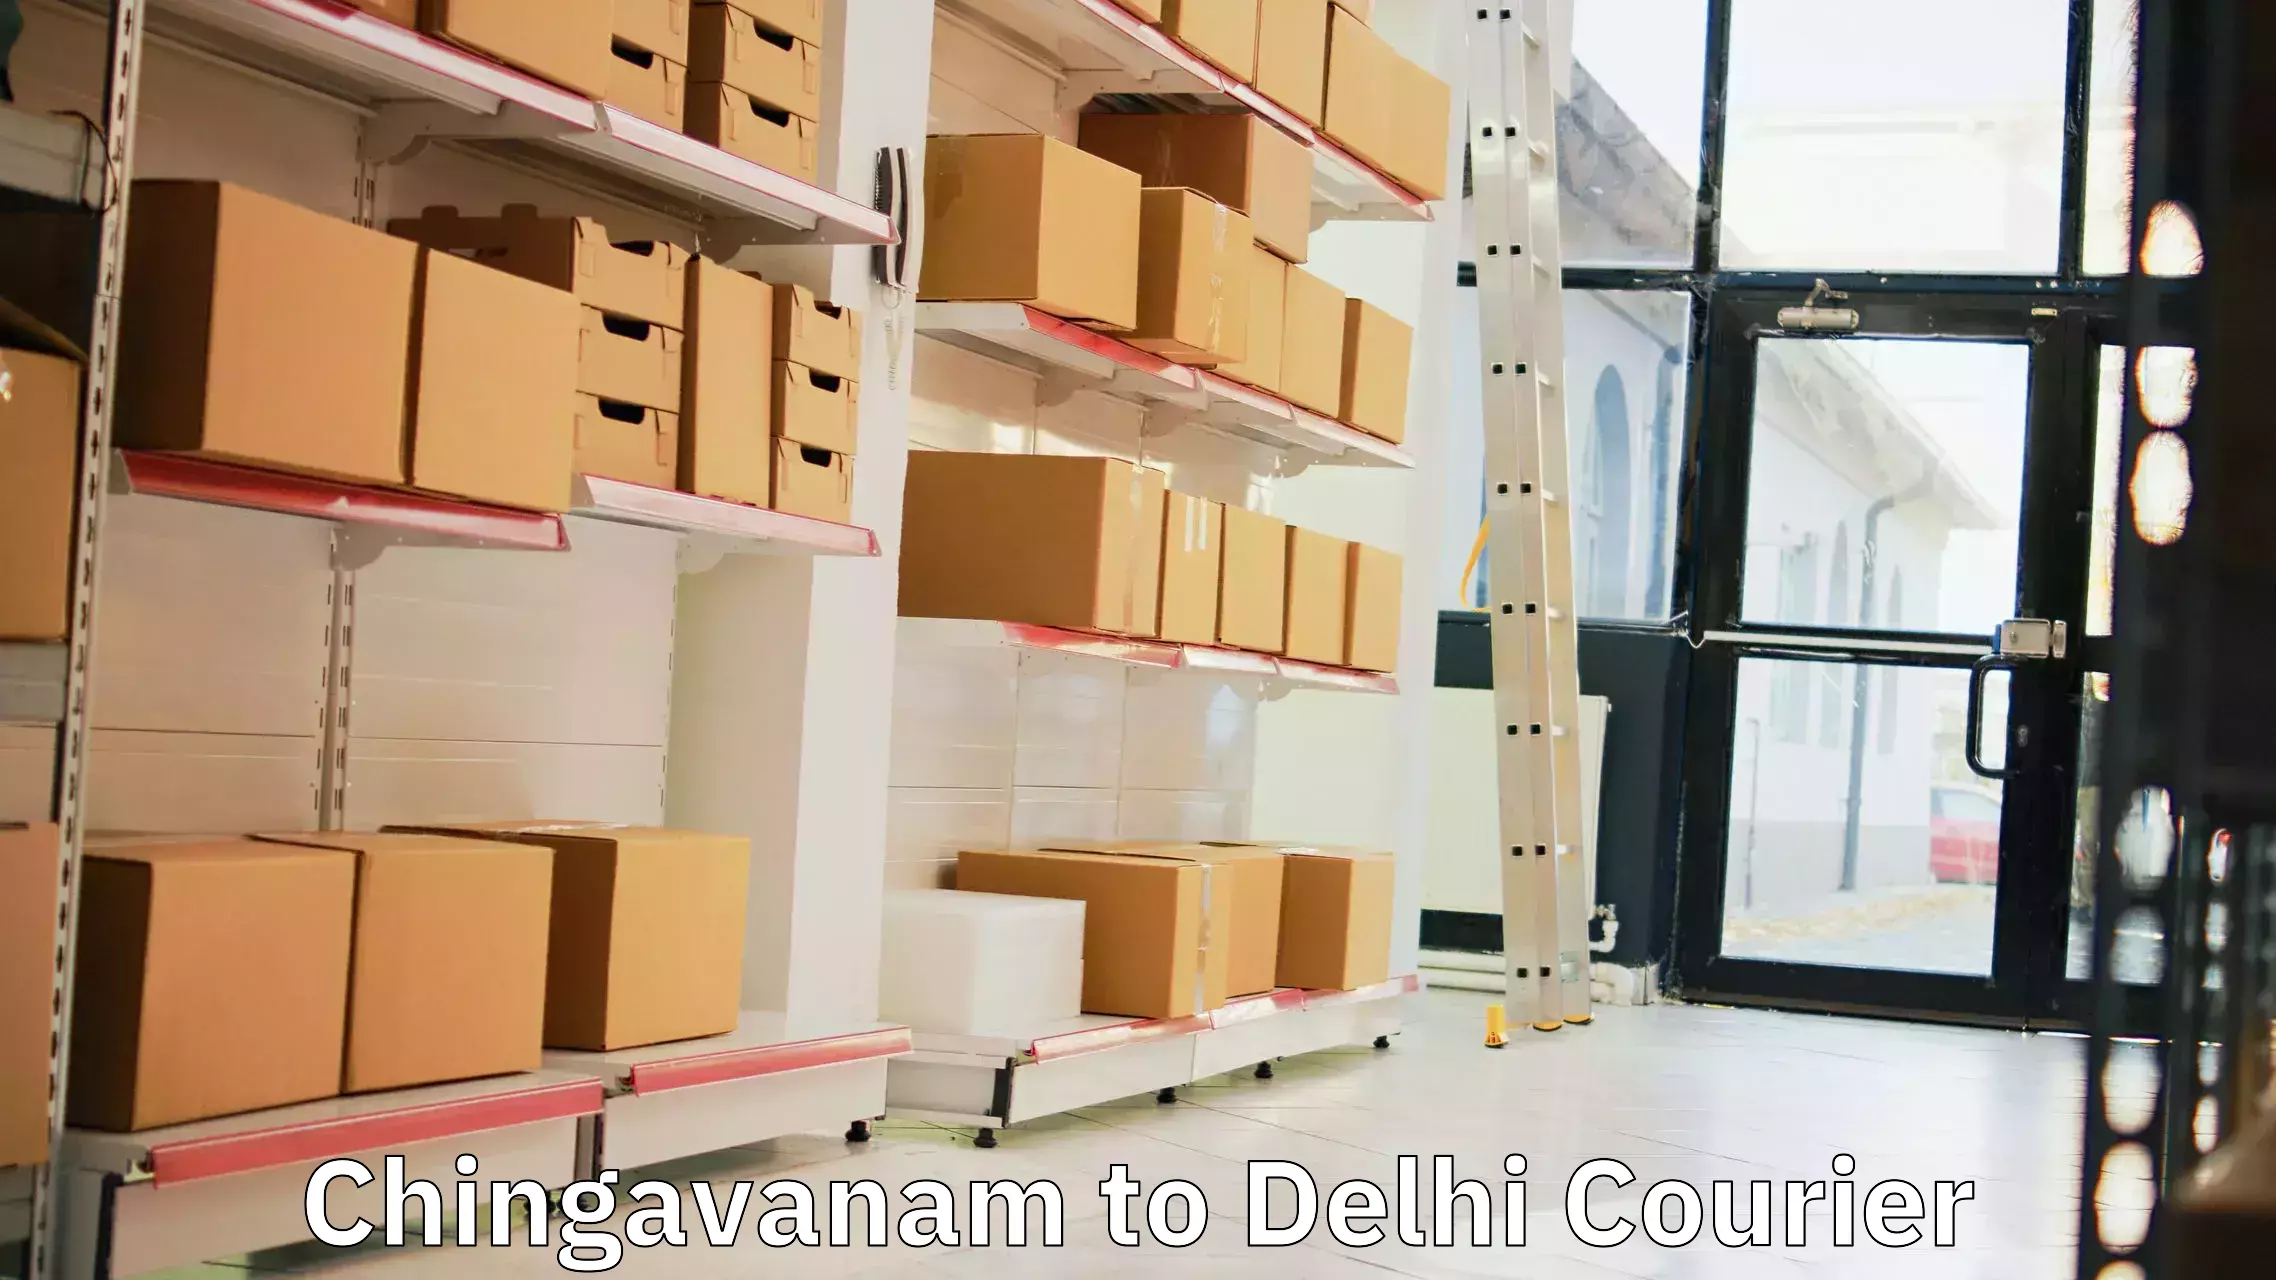 Local courier options Chingavanam to Delhi